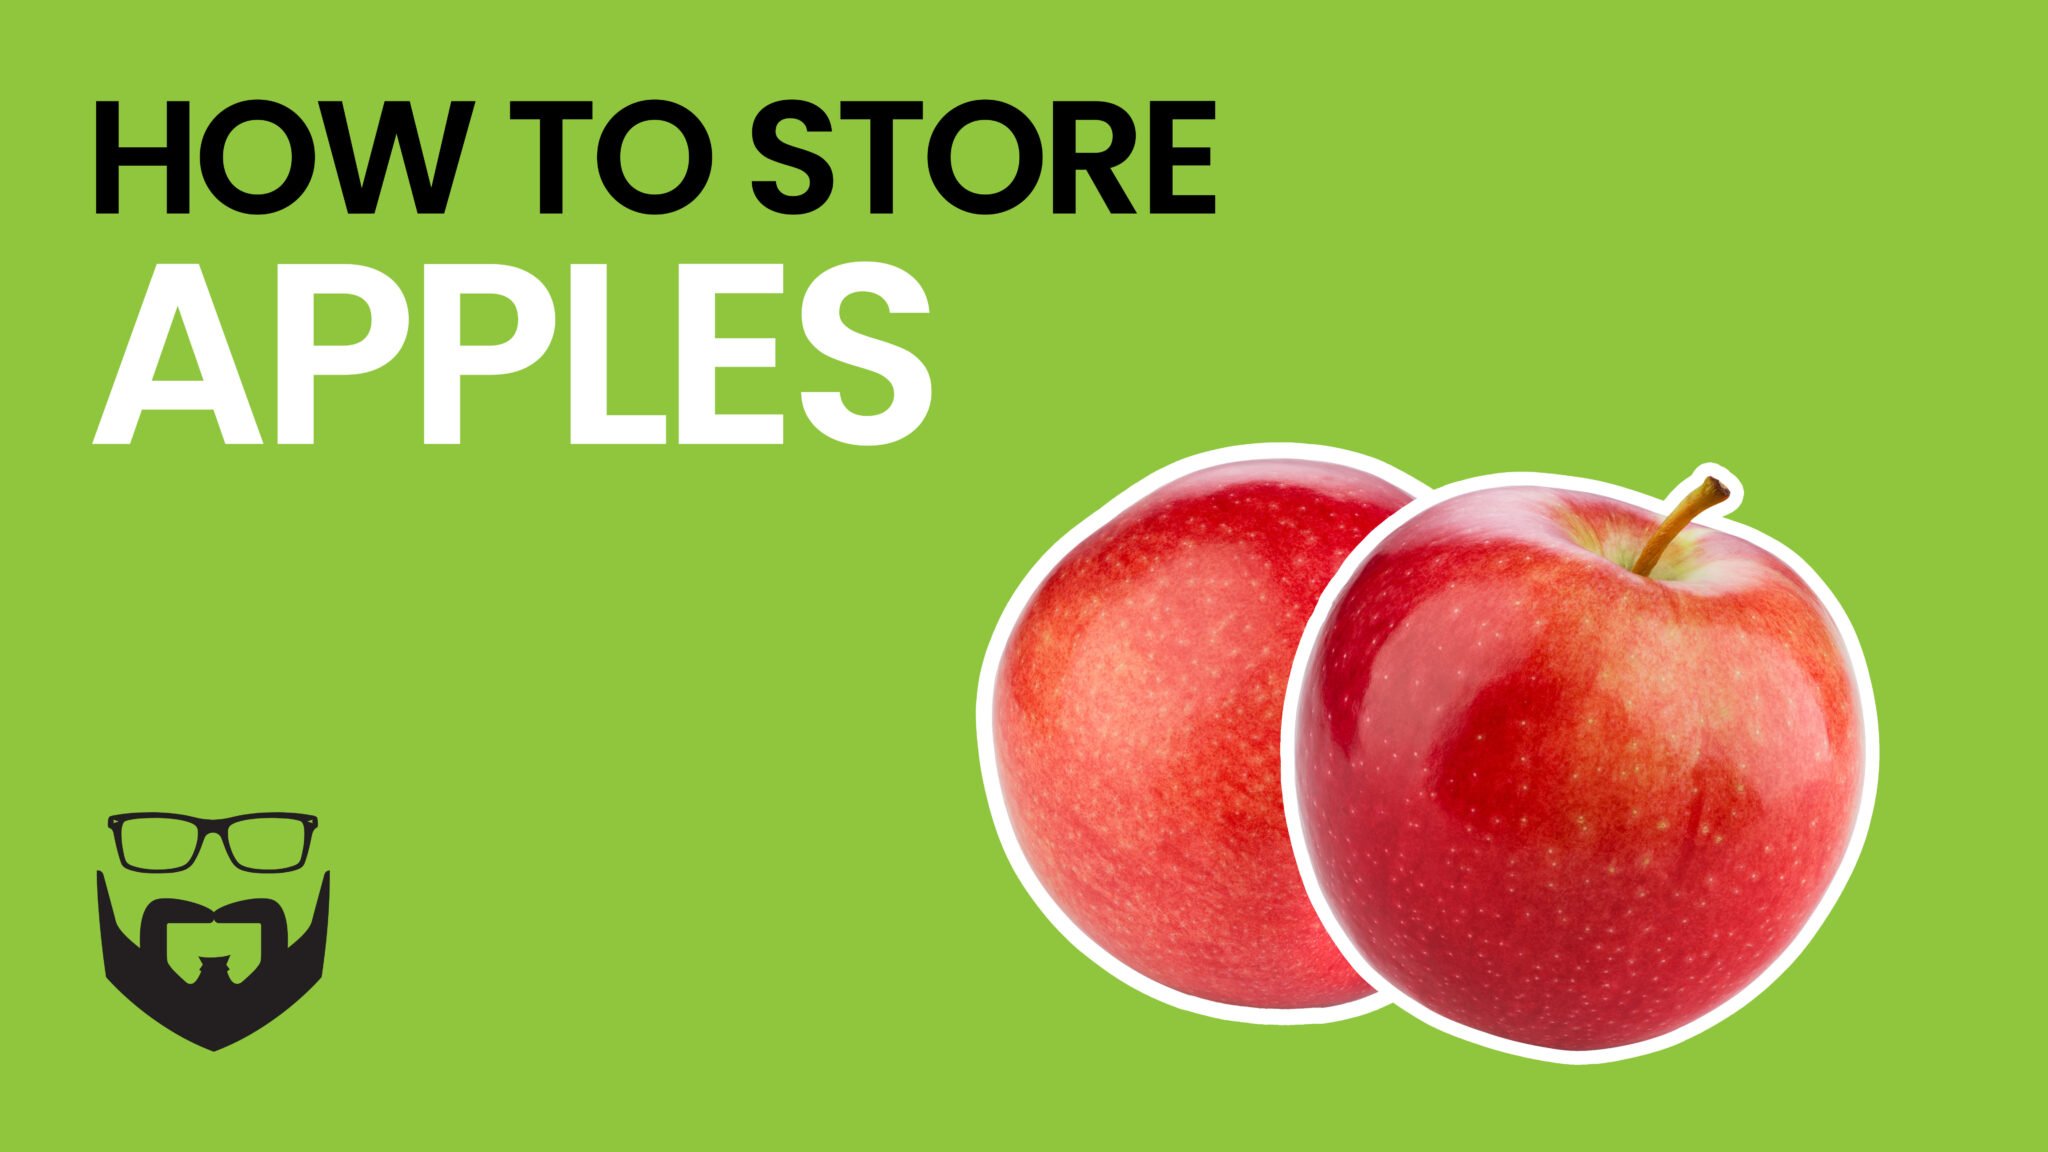 How to Store Apples Video - Green